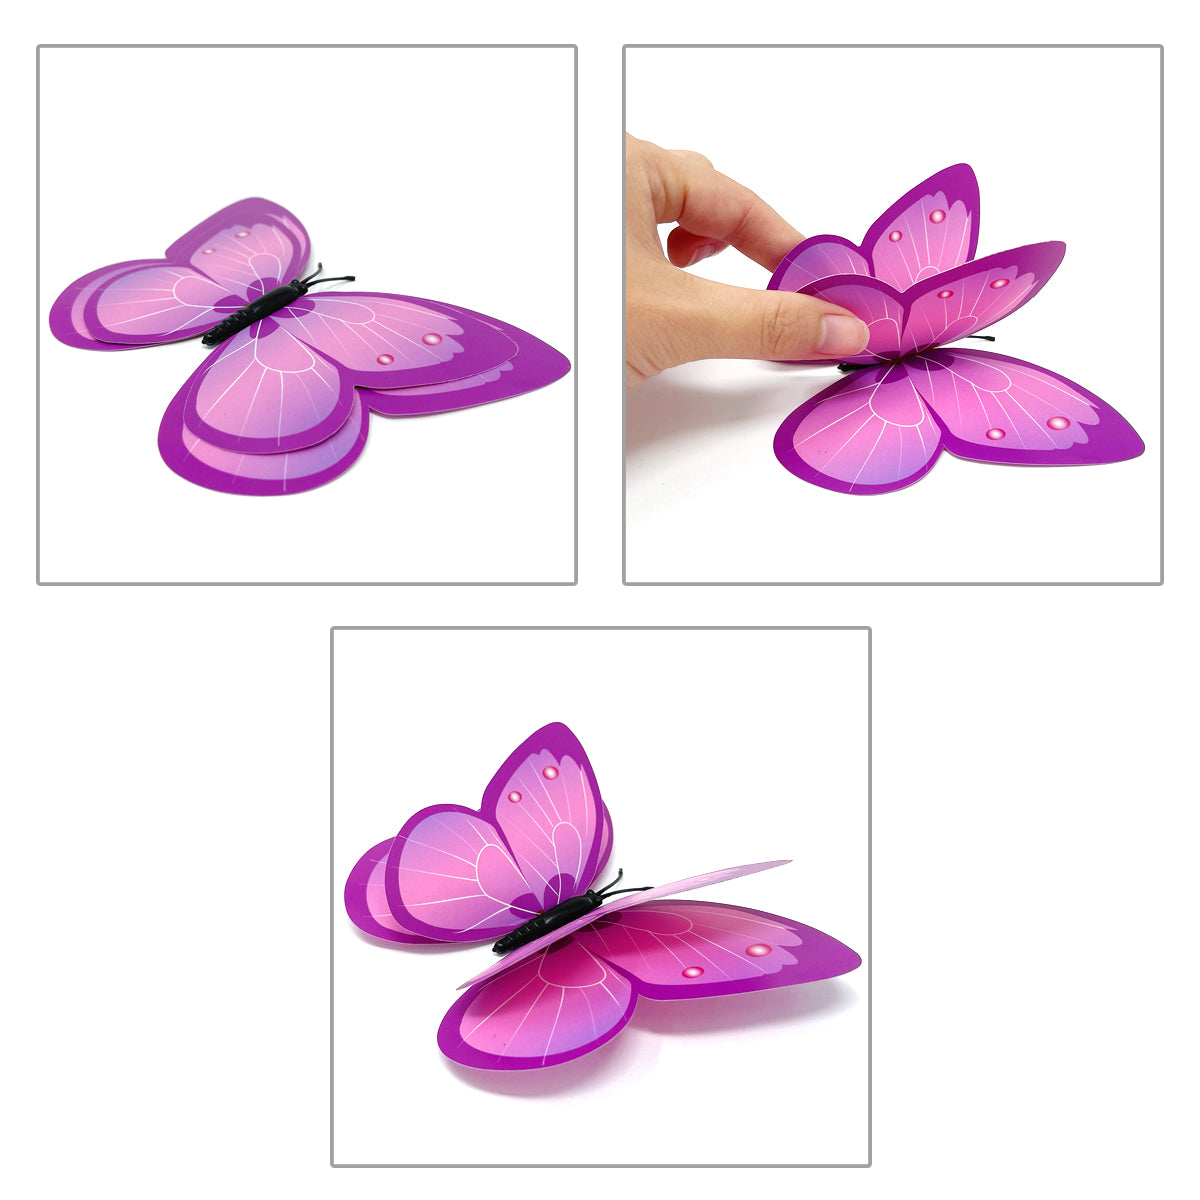 Wrapables 3D Double Wings Butterfly Decorative Wall Decor Stickers, Decals for Bedroom (24 Pcs) Pink